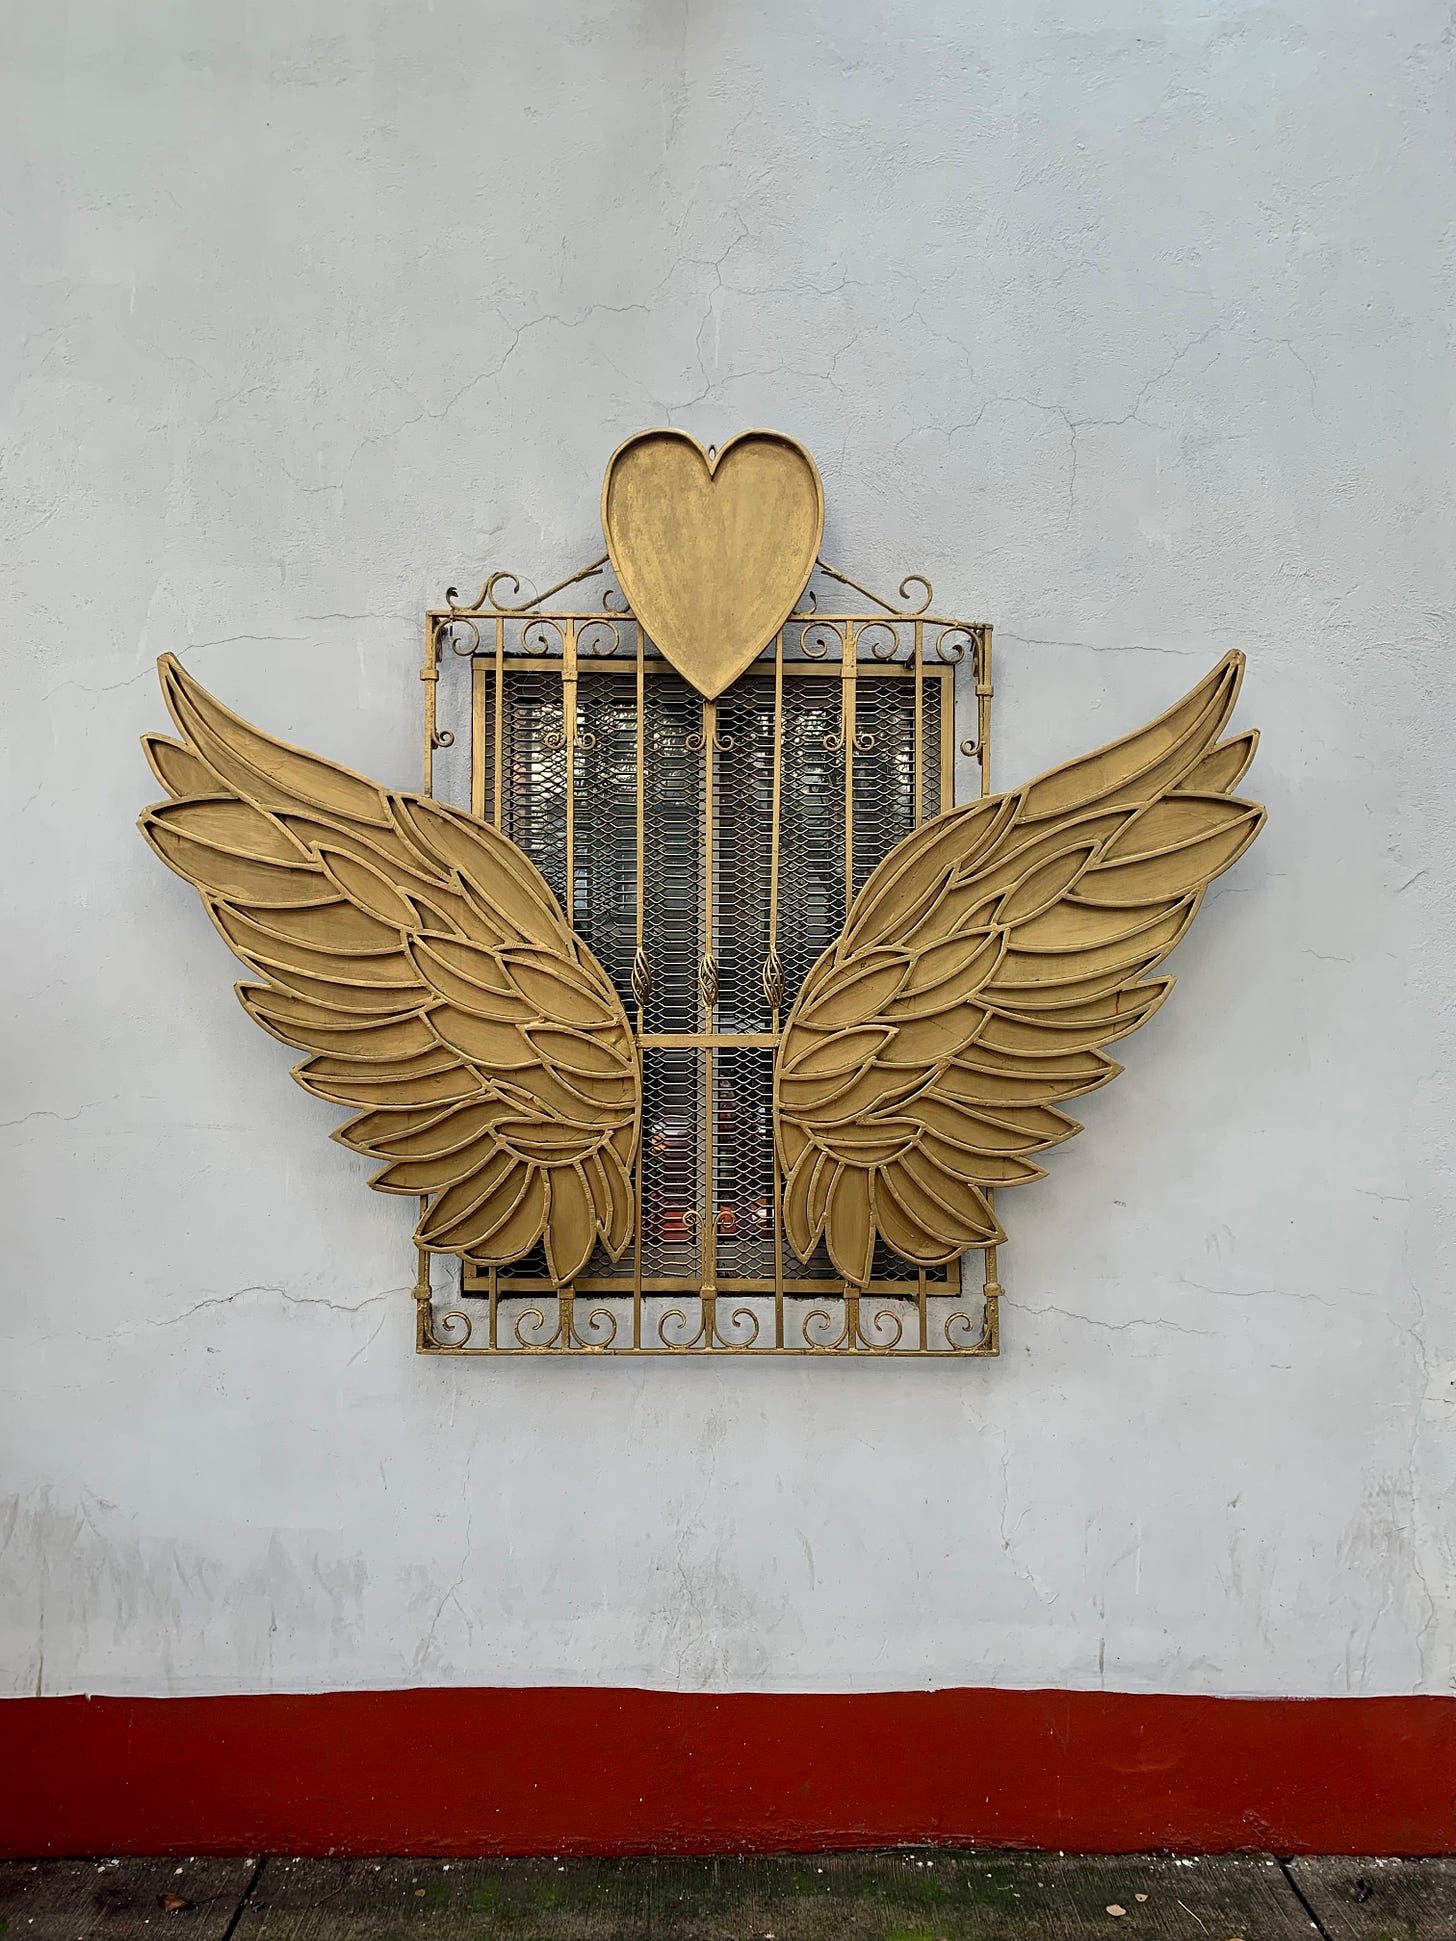 A window in Mexico City, the wall is white and the window has bars over it that are painted gold, with a heart at the top and gold wings spanning out from the middle. At the bottom is a red trim.